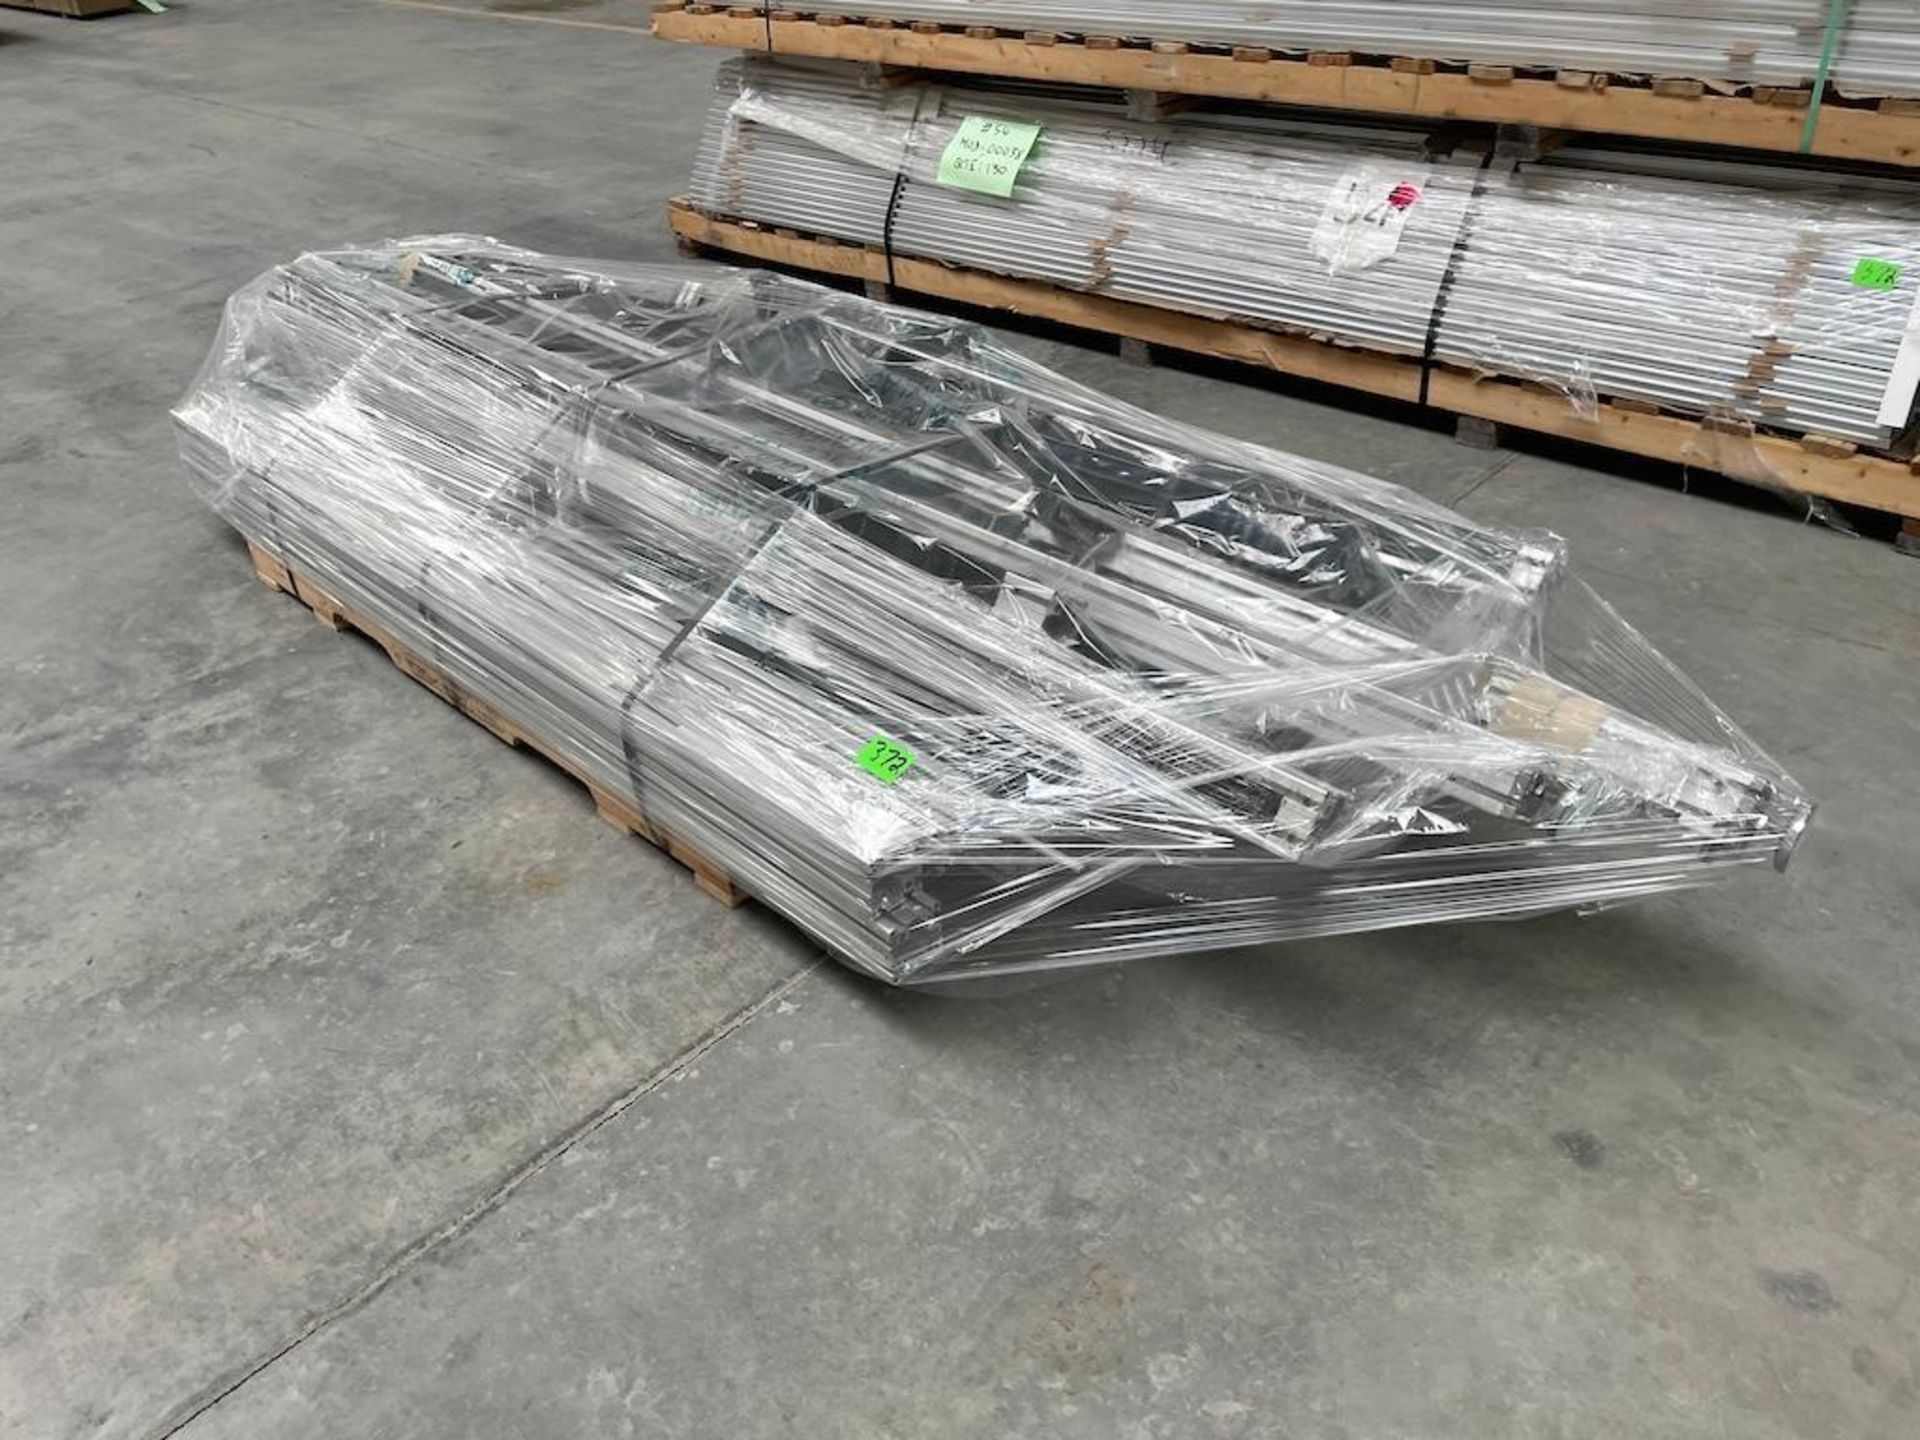 LOT (26) SKIDS ALUMINUM EXTRUSIONS, SOME SKIDS UP TO 470 KG AND 28 FT LONG [MATANE] *PLEASE NOTE, EX - Image 10 of 40